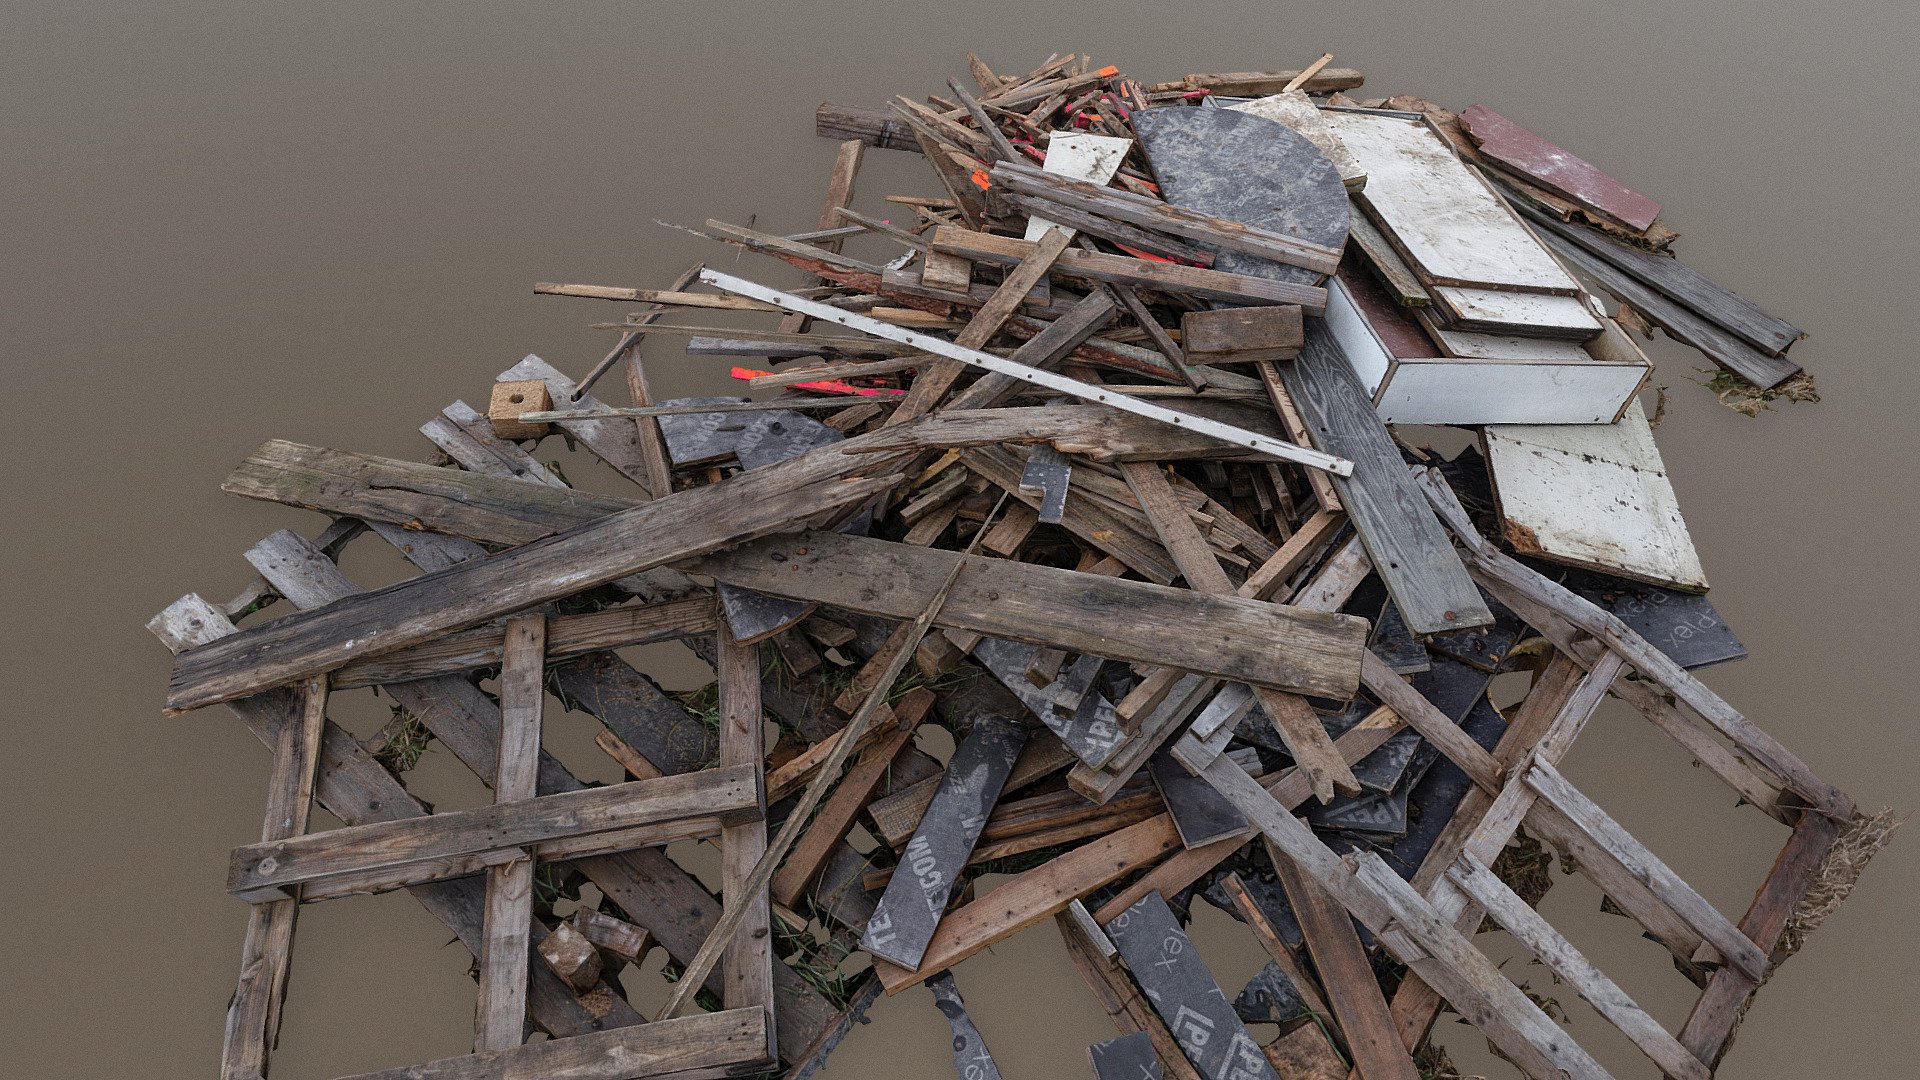 Waste construction wood lumber debris from appartment reconstruction building work, construction demolition ruin house wall board junk pieces 

Created in RealityCapture by Capturing Reality 

photogrammetry scan (250x24MP), 3x8K textures + HD Normals

Consider buying me a coffee https://www.buymeacoffee.com/matousekfoto - Waste construction wood - Download Free 3D model by matousekfoto 3d model